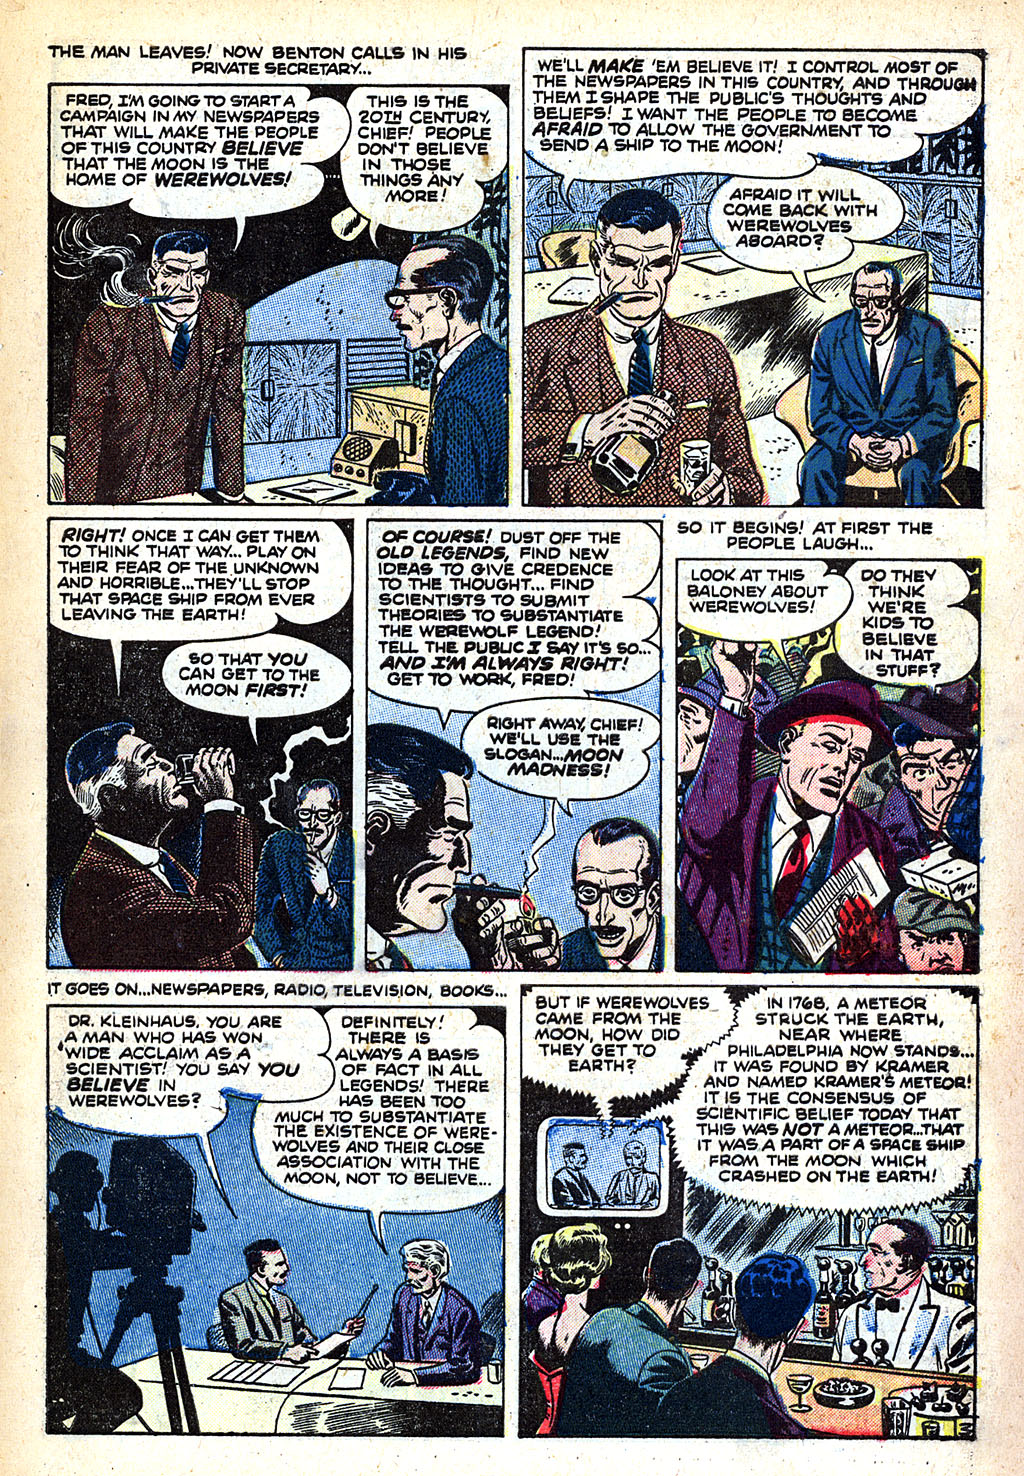 Marvel Tales (1949) 118 Page 4